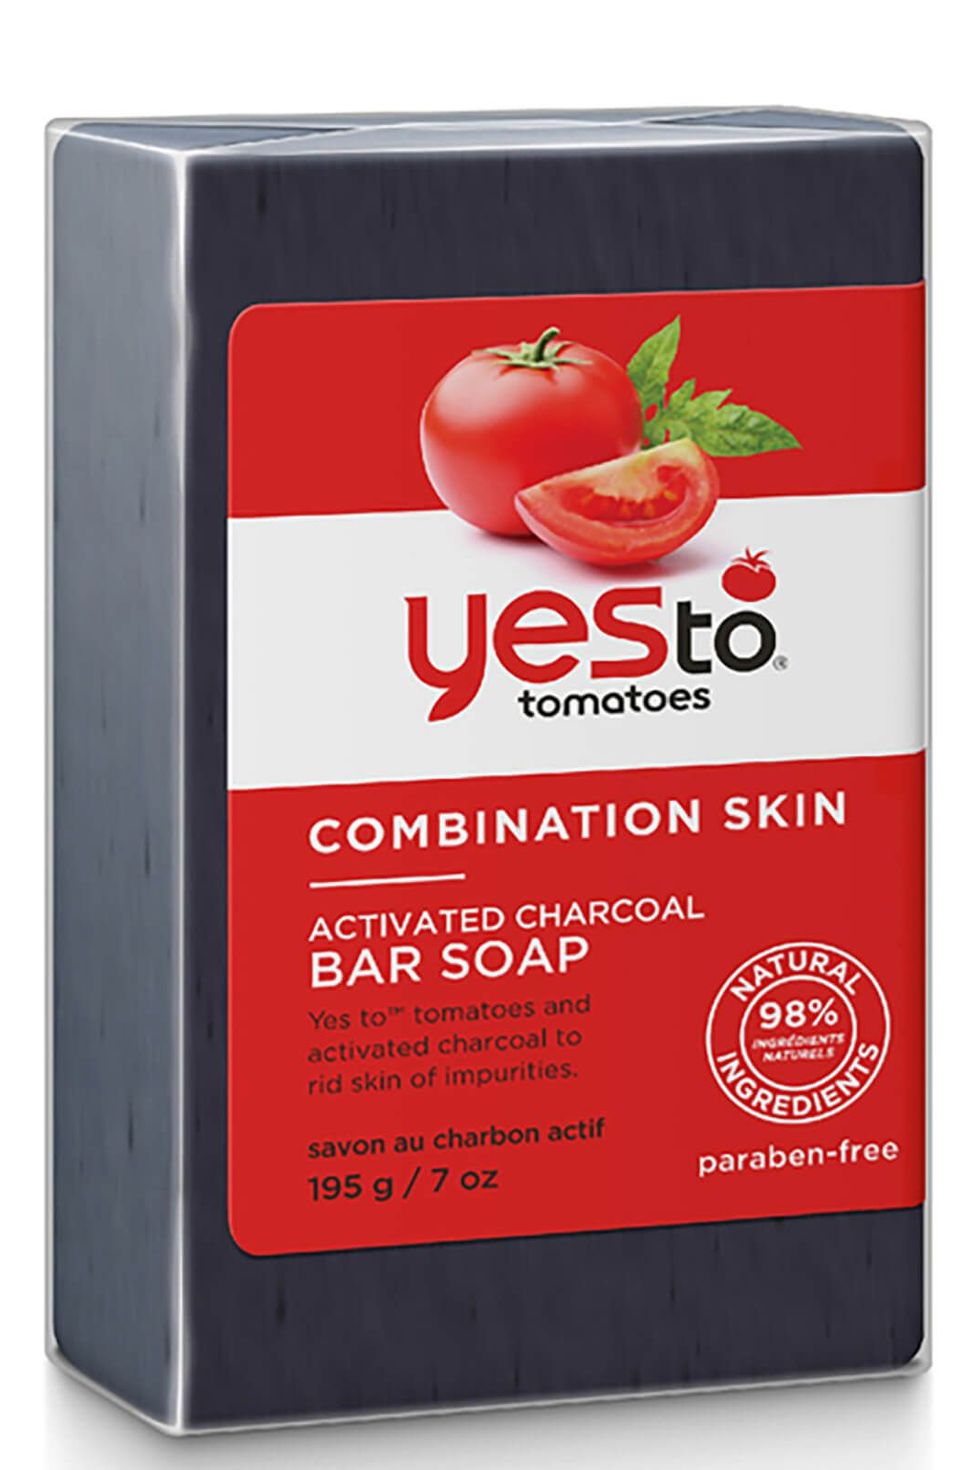 Yes to Tomatoes Activated Charcoal Bar Soap